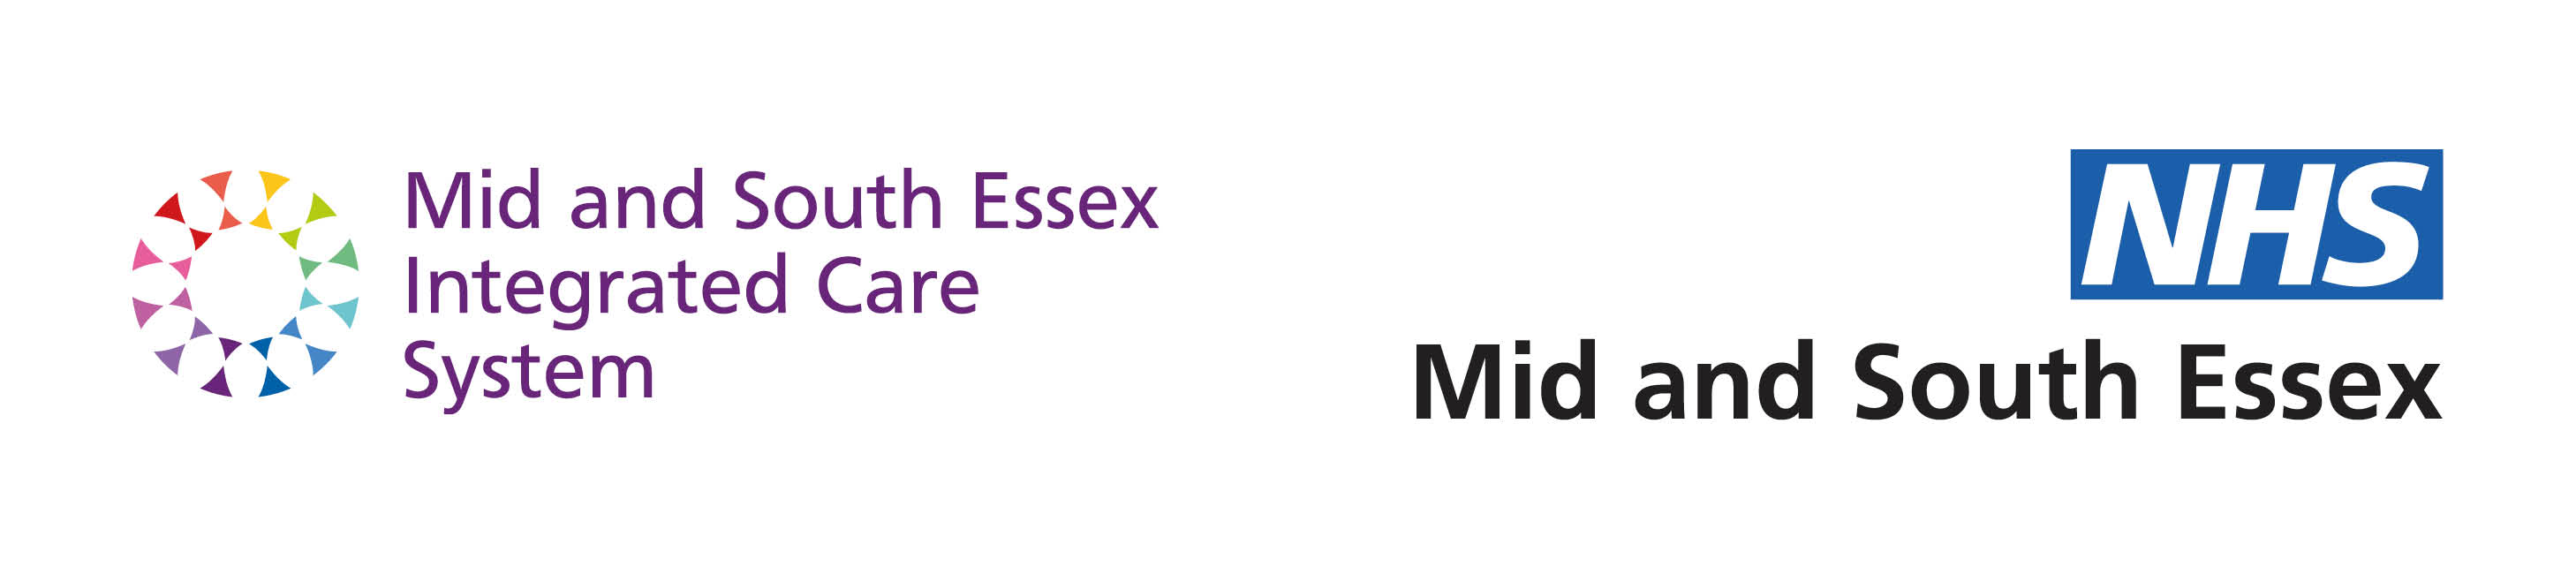 Logos of Mid and South Essex Integrated Care system and NHS Mid and South Essex